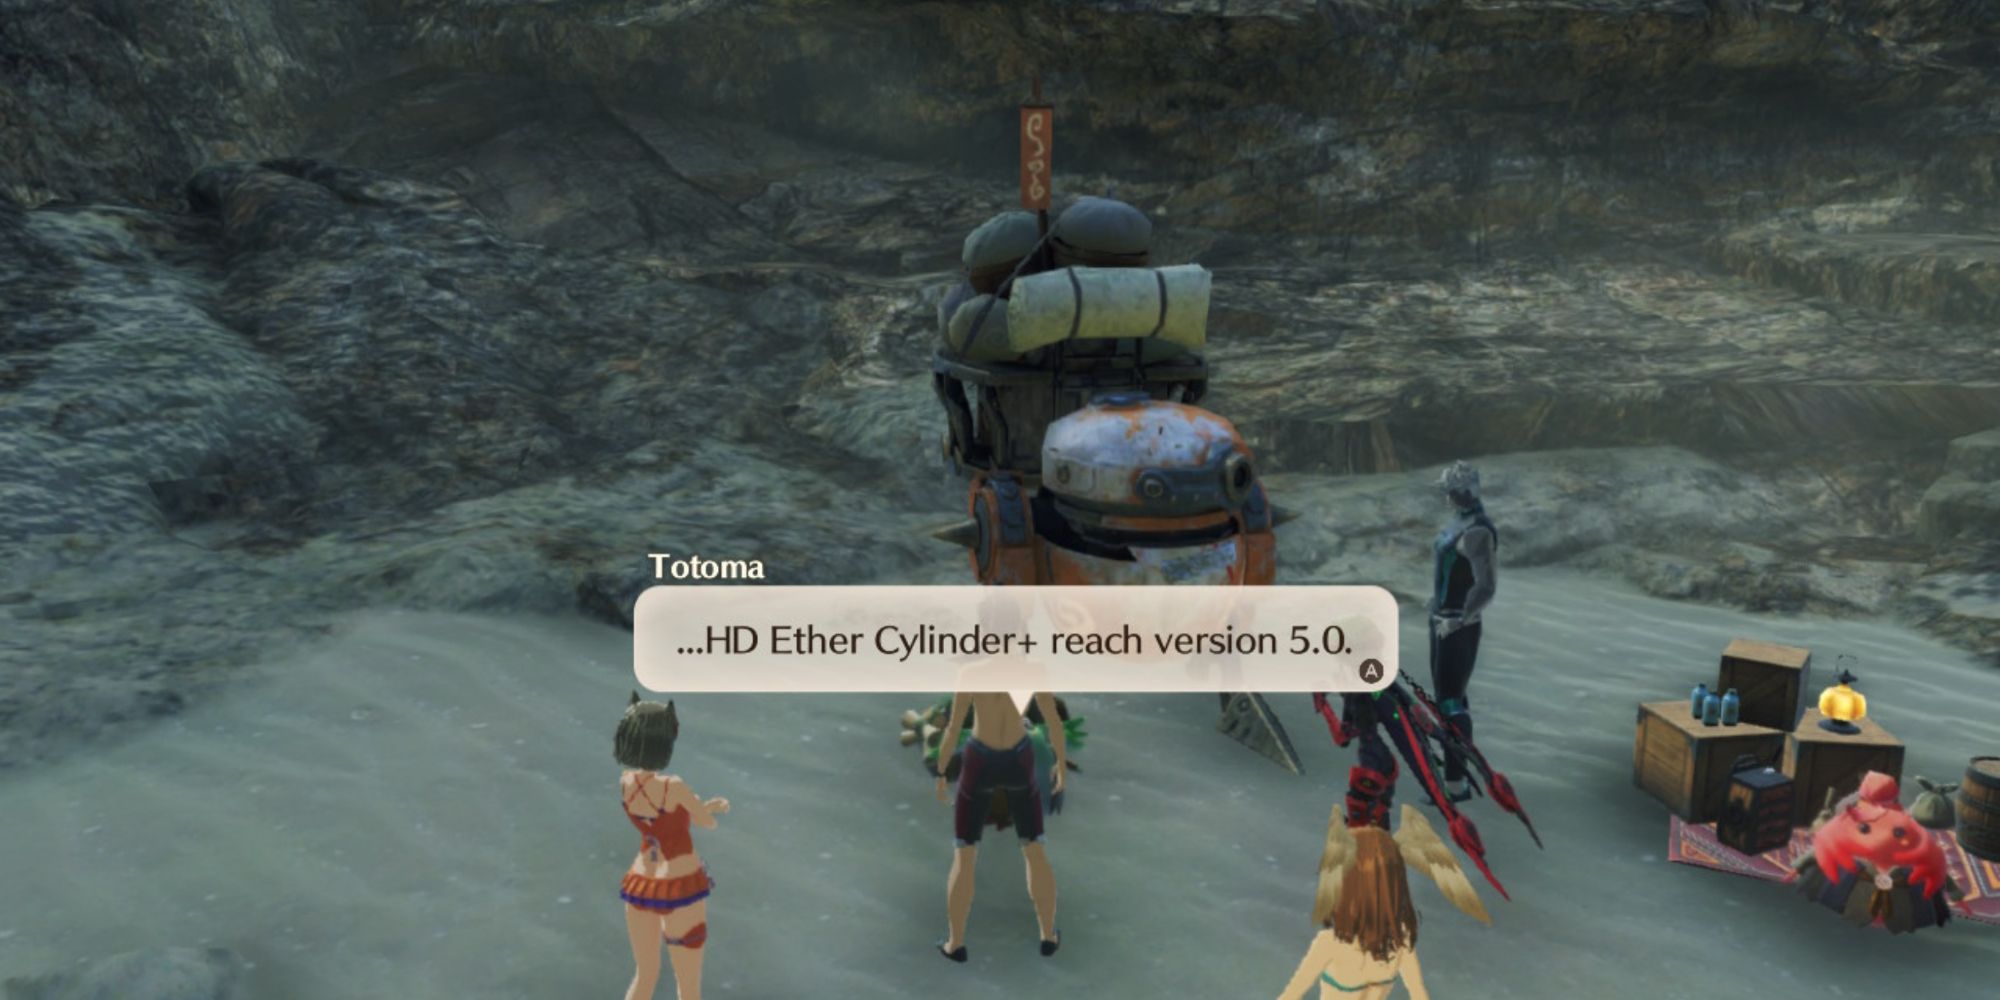 Upgrading the HD Ether Cylinder+ to Version 5.0 in Xenoblade Chronicles 3